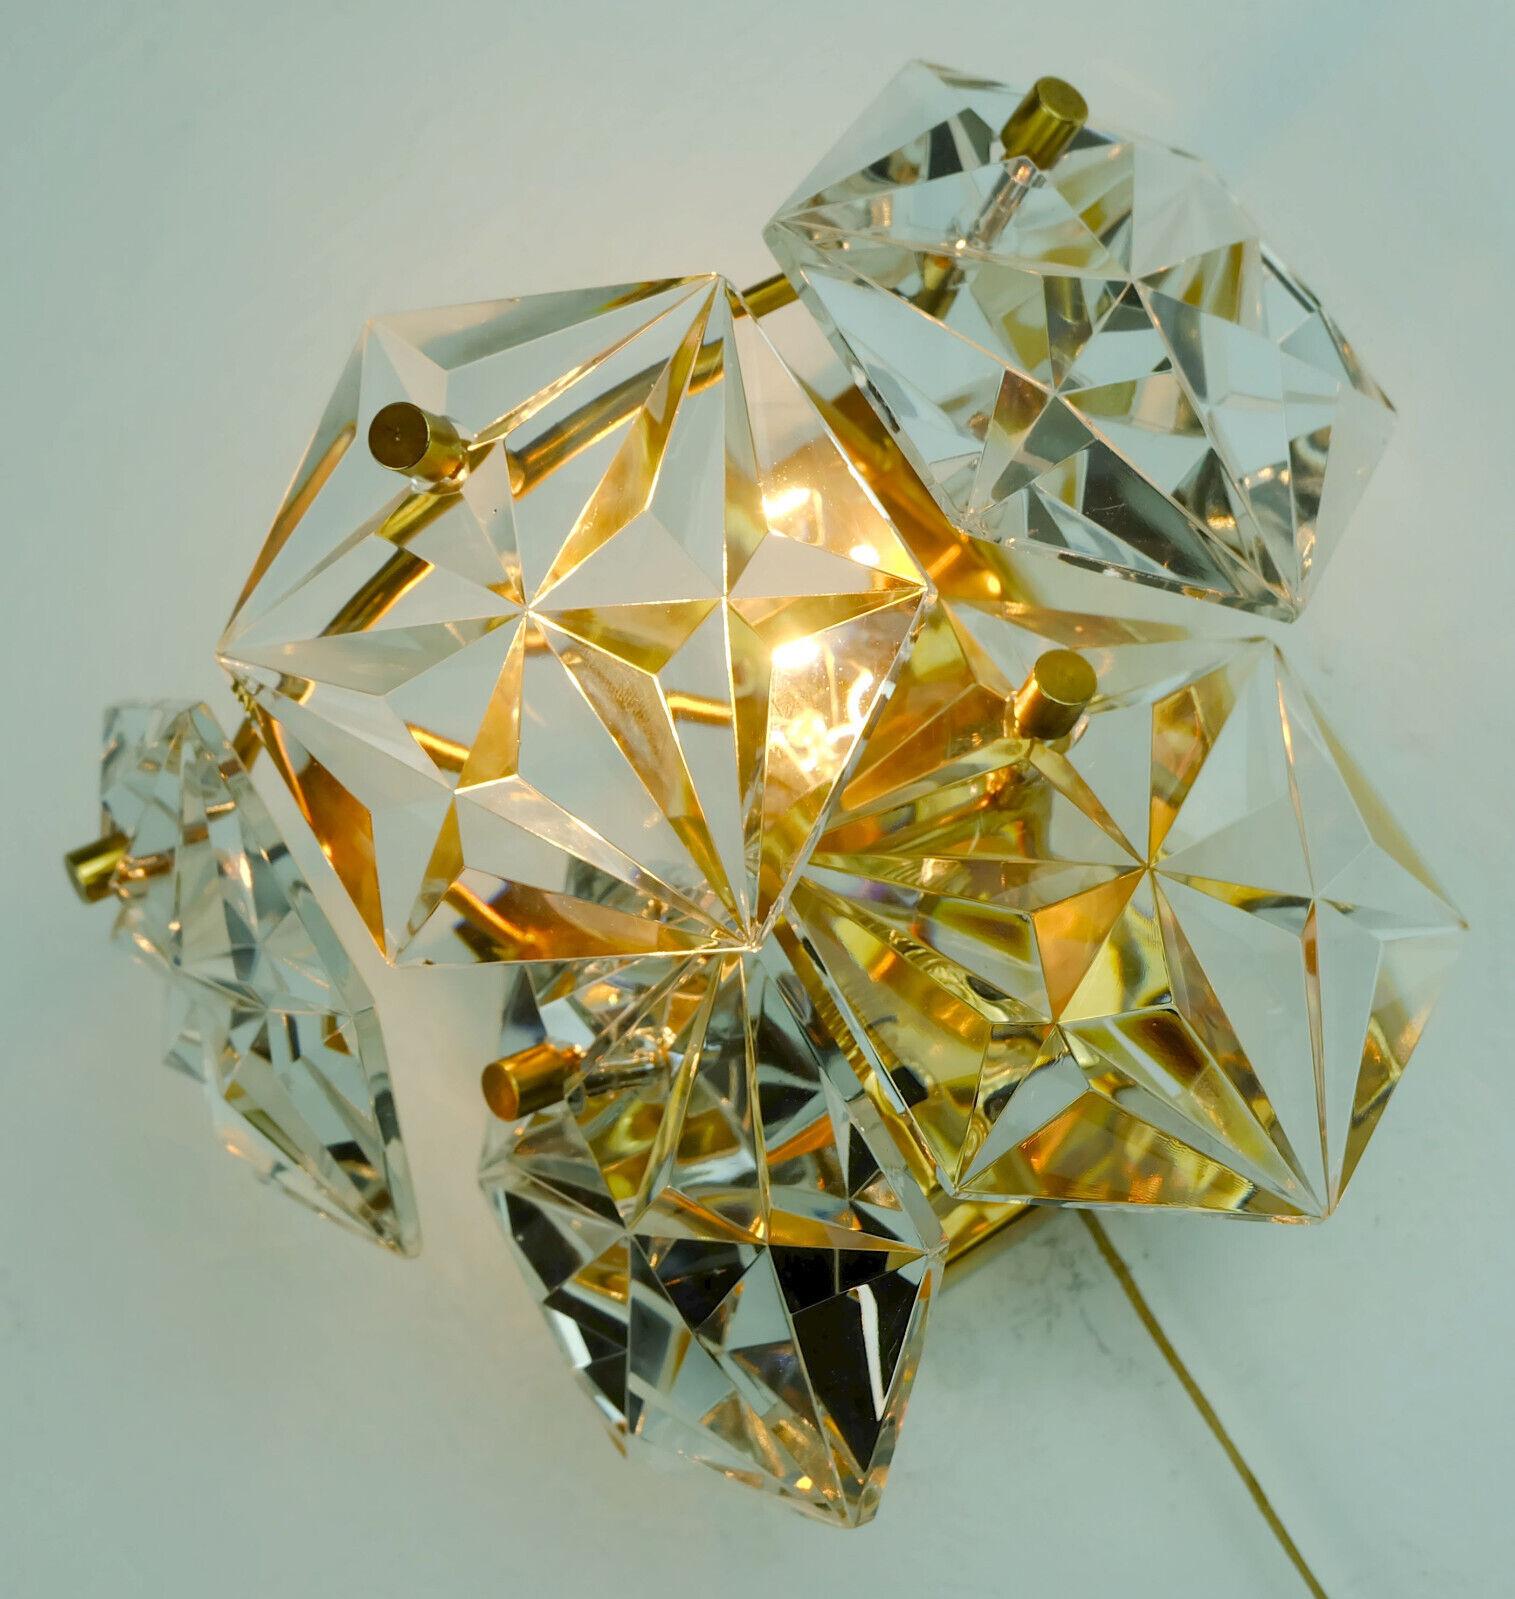 Very beautiful wall lamp manufactured in the 1960s by Kinkeldey. Made of gilded metal and crystal glass. The shade consists of 5 glass prisms made of faceted crystal glass. Holds 1 E14 light bulb.

Pre-used, in good condition. We recommend